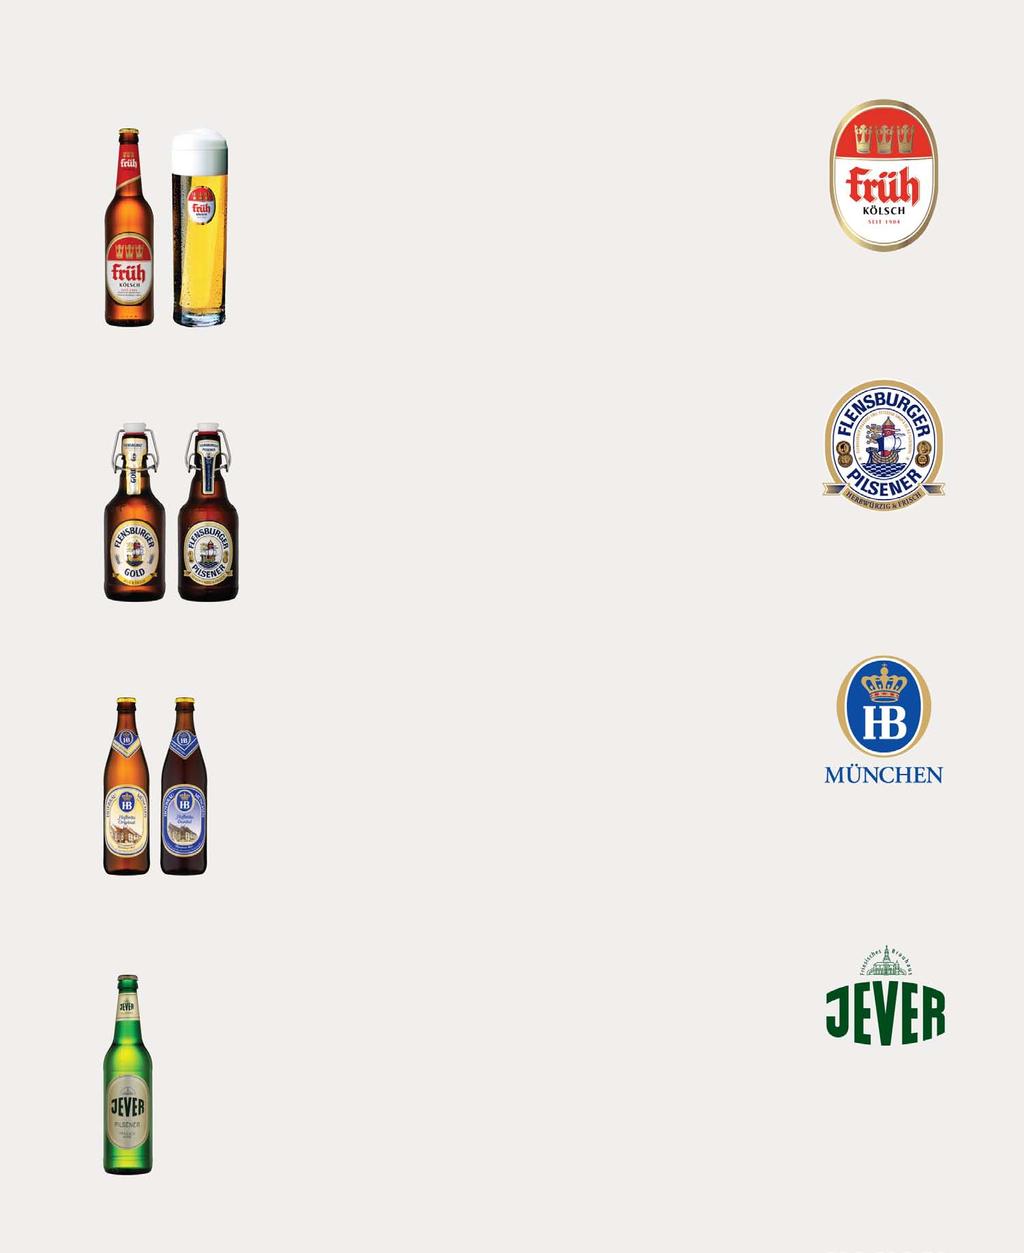 Früh kölsch GERMAN CRAFT BEER flensburger hofbräu jever A style distinctive to Cologne, the name Kölsch is protected by the Kölsch Konvention so that only beers brewed in and around the city can bear